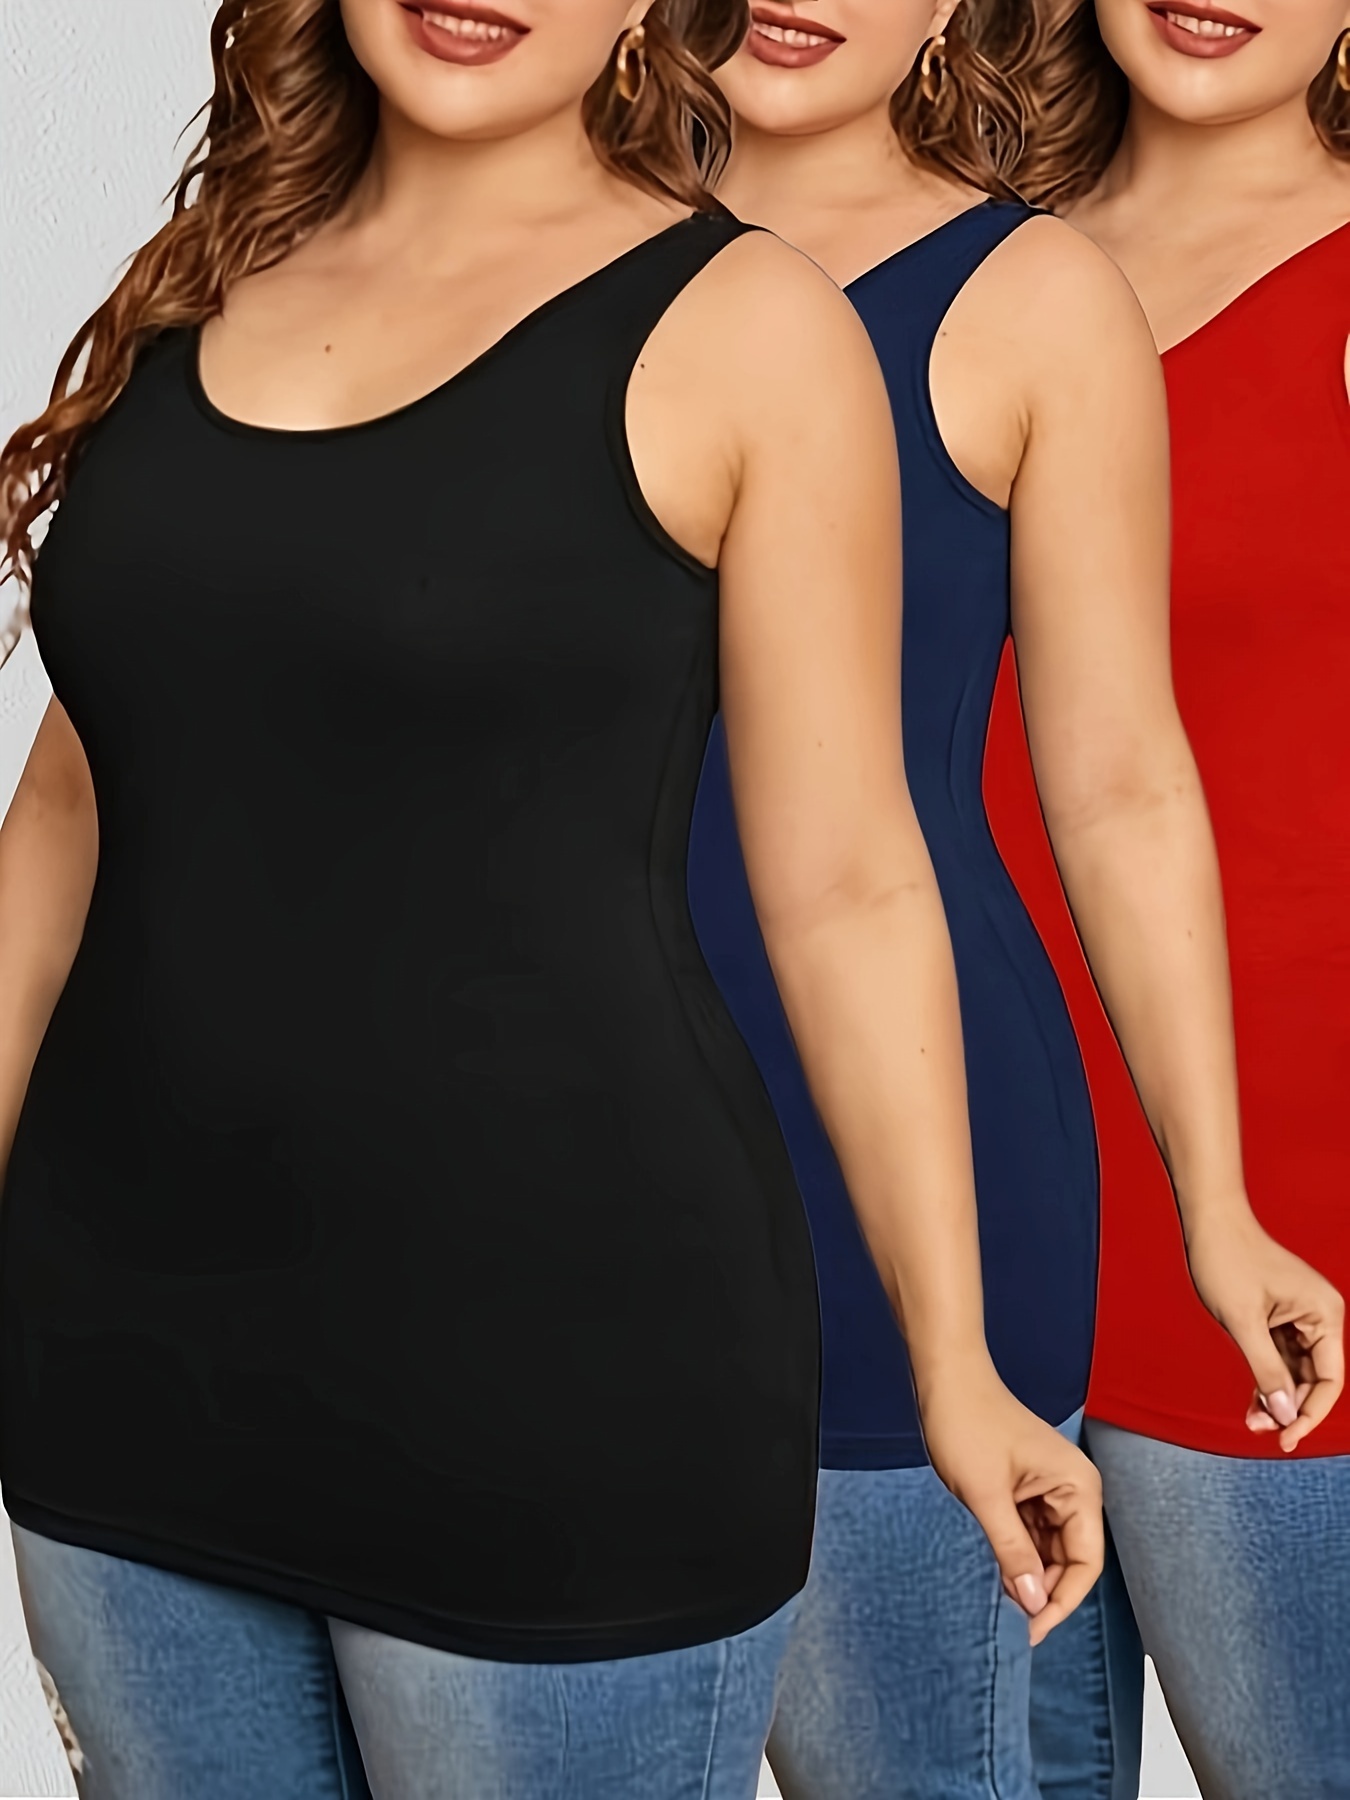 EHQJNJ Tank Tops for Women Cropped Women's Casual Solid Color V Neck Vest  Simple and Exquisite Design Womens Tank Tops Fitted Plus Size Crop Tank  Tops for Women 